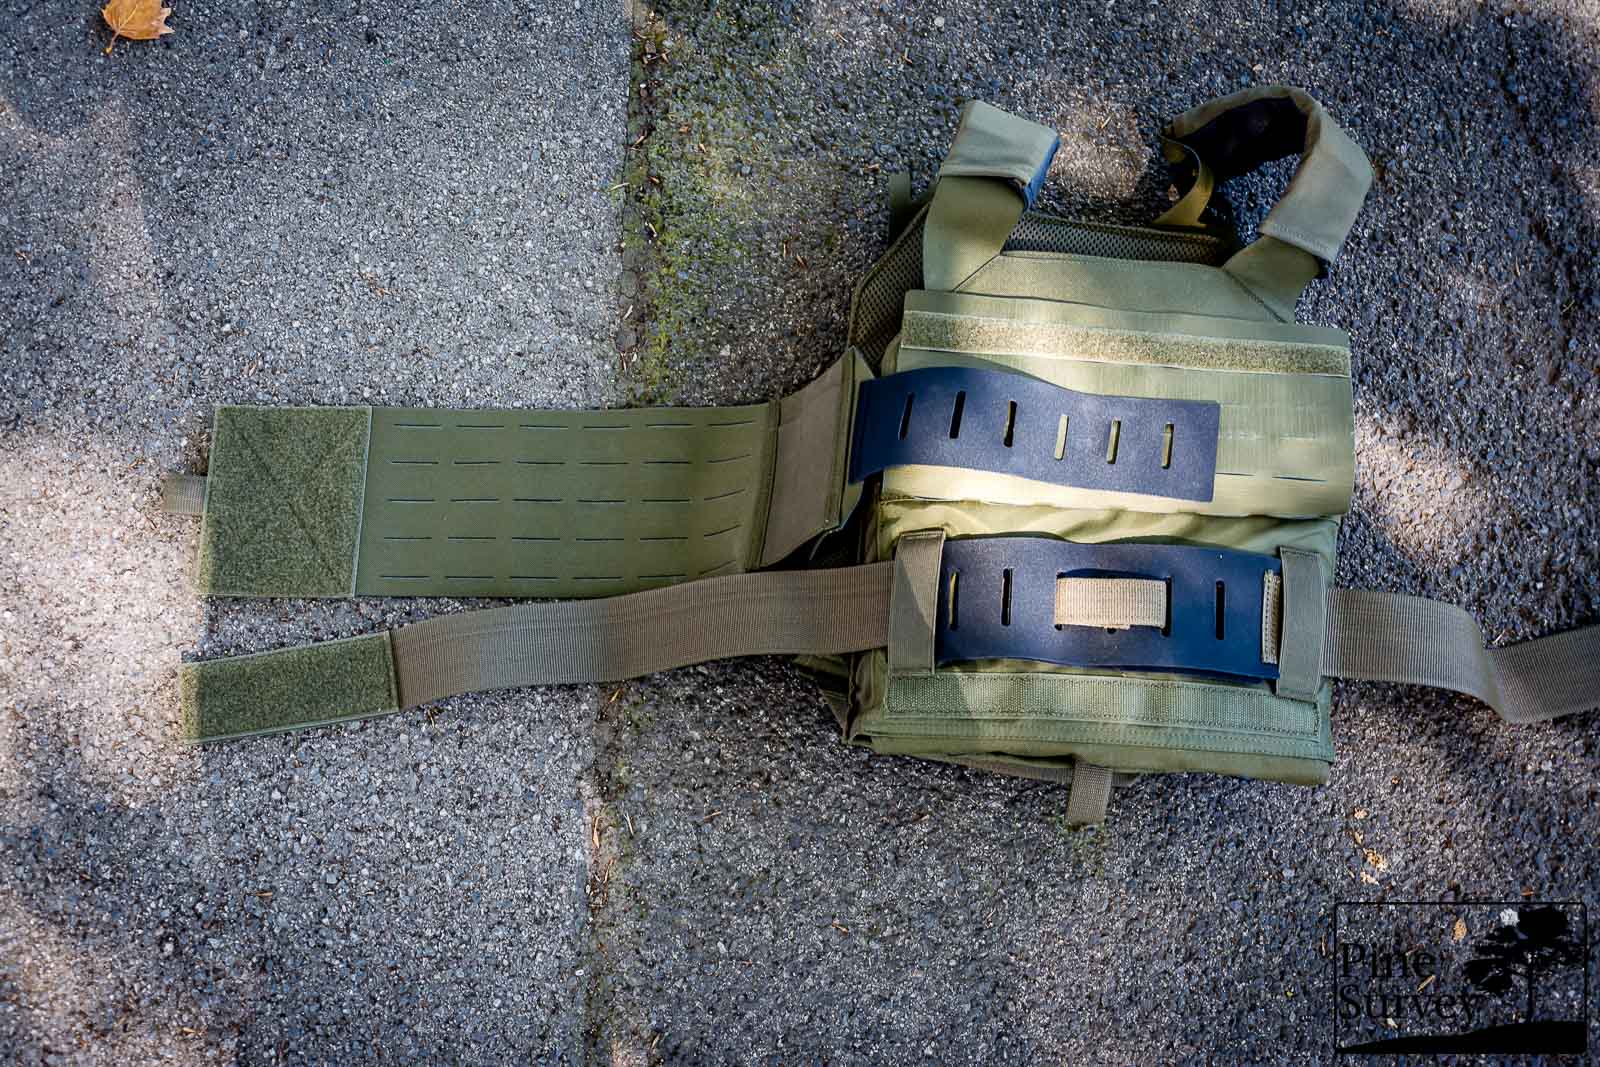 Two options to mount the plate carrier